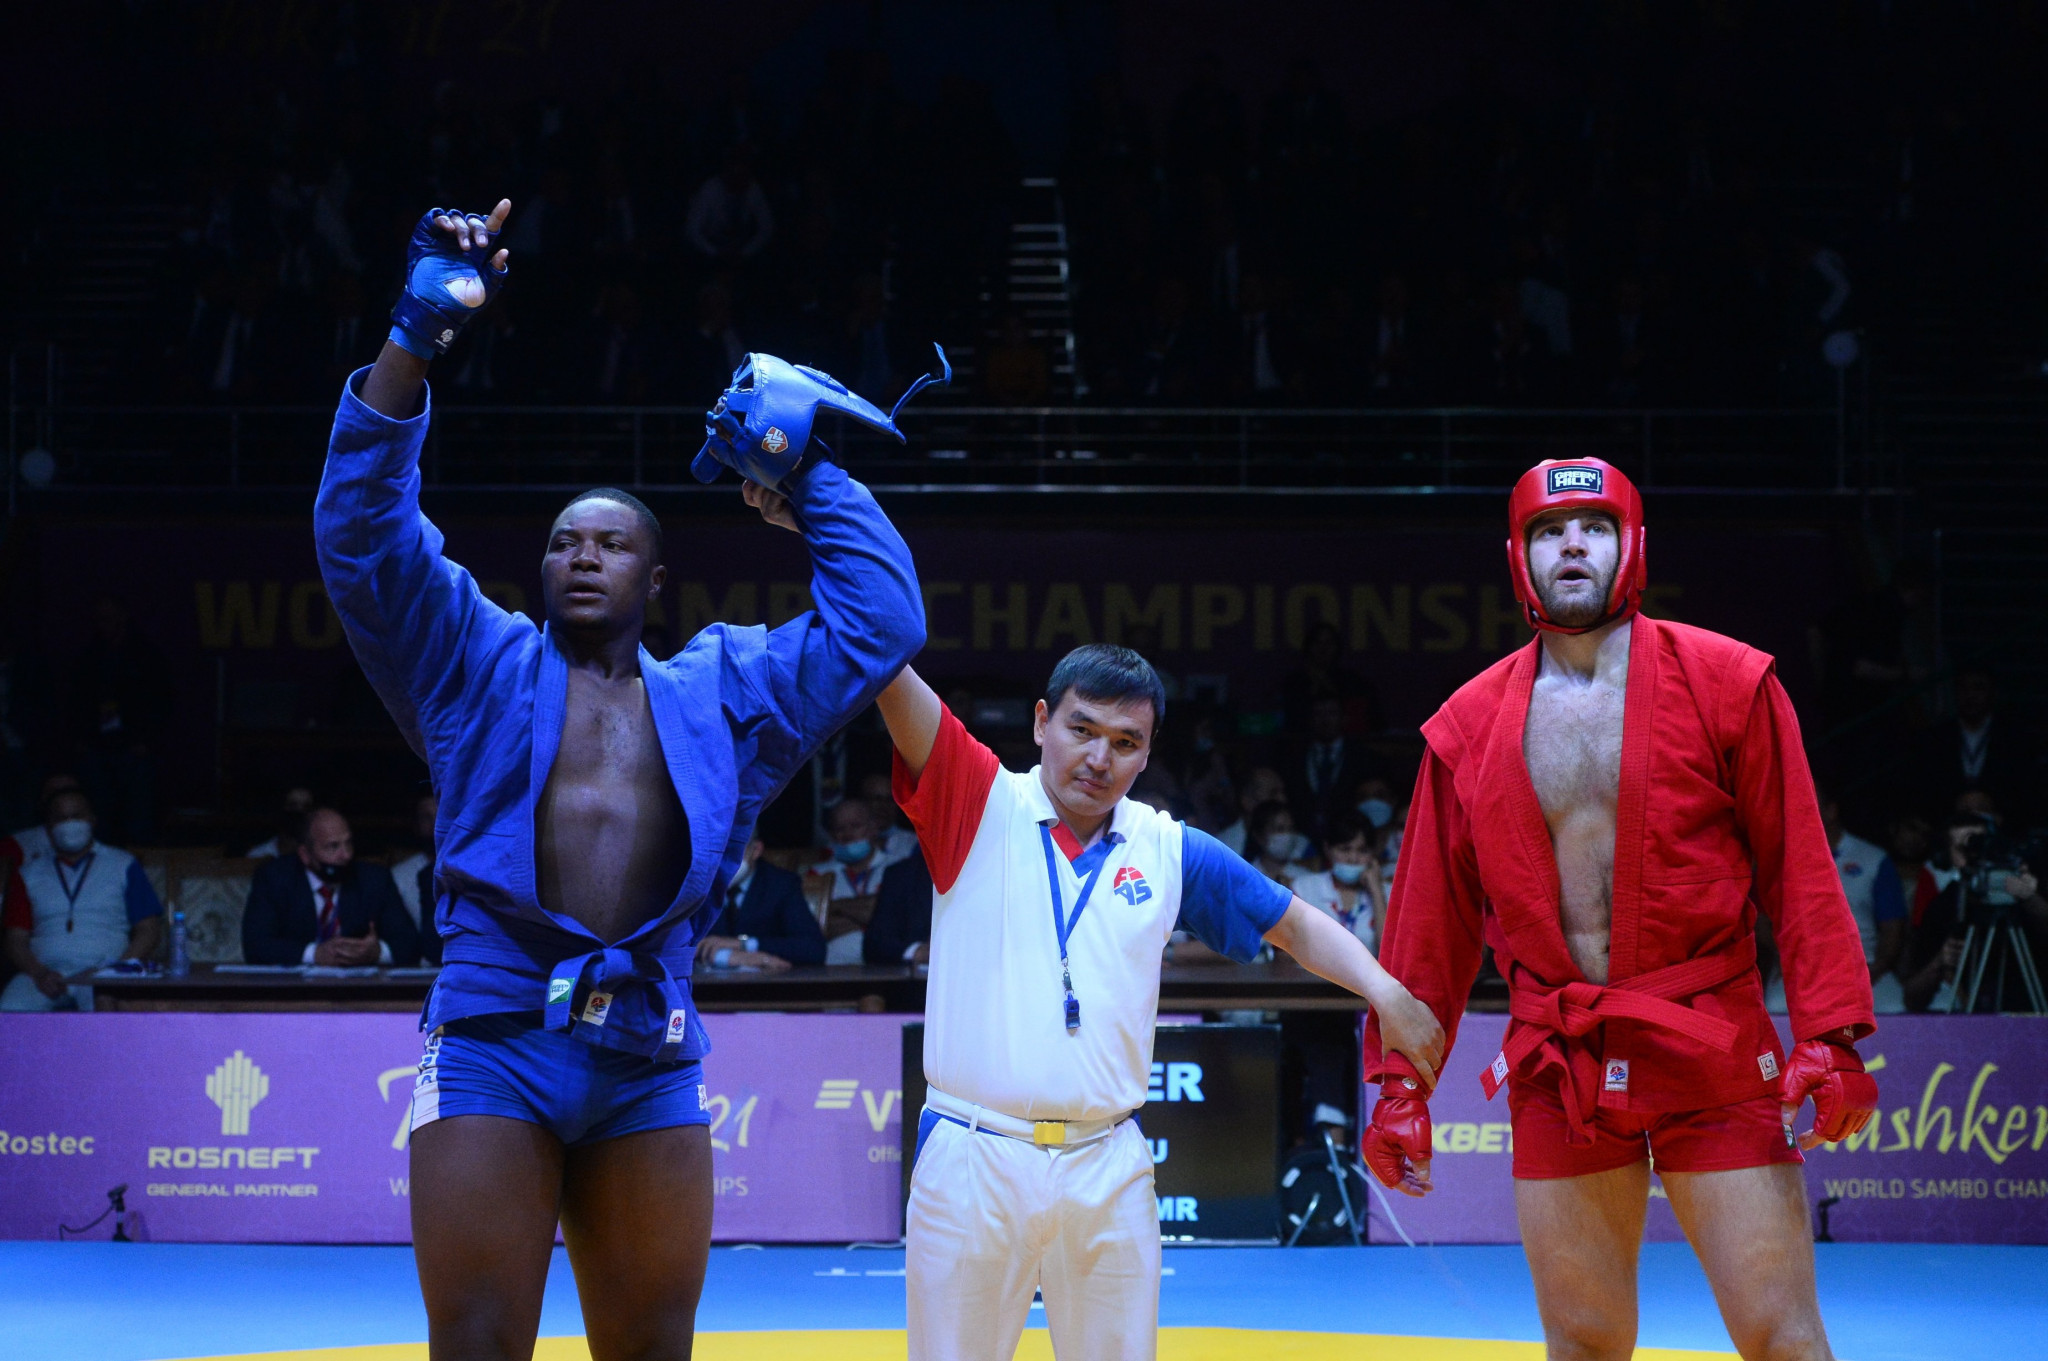 Russia lose three of four finals on first day of World Sambo Championships